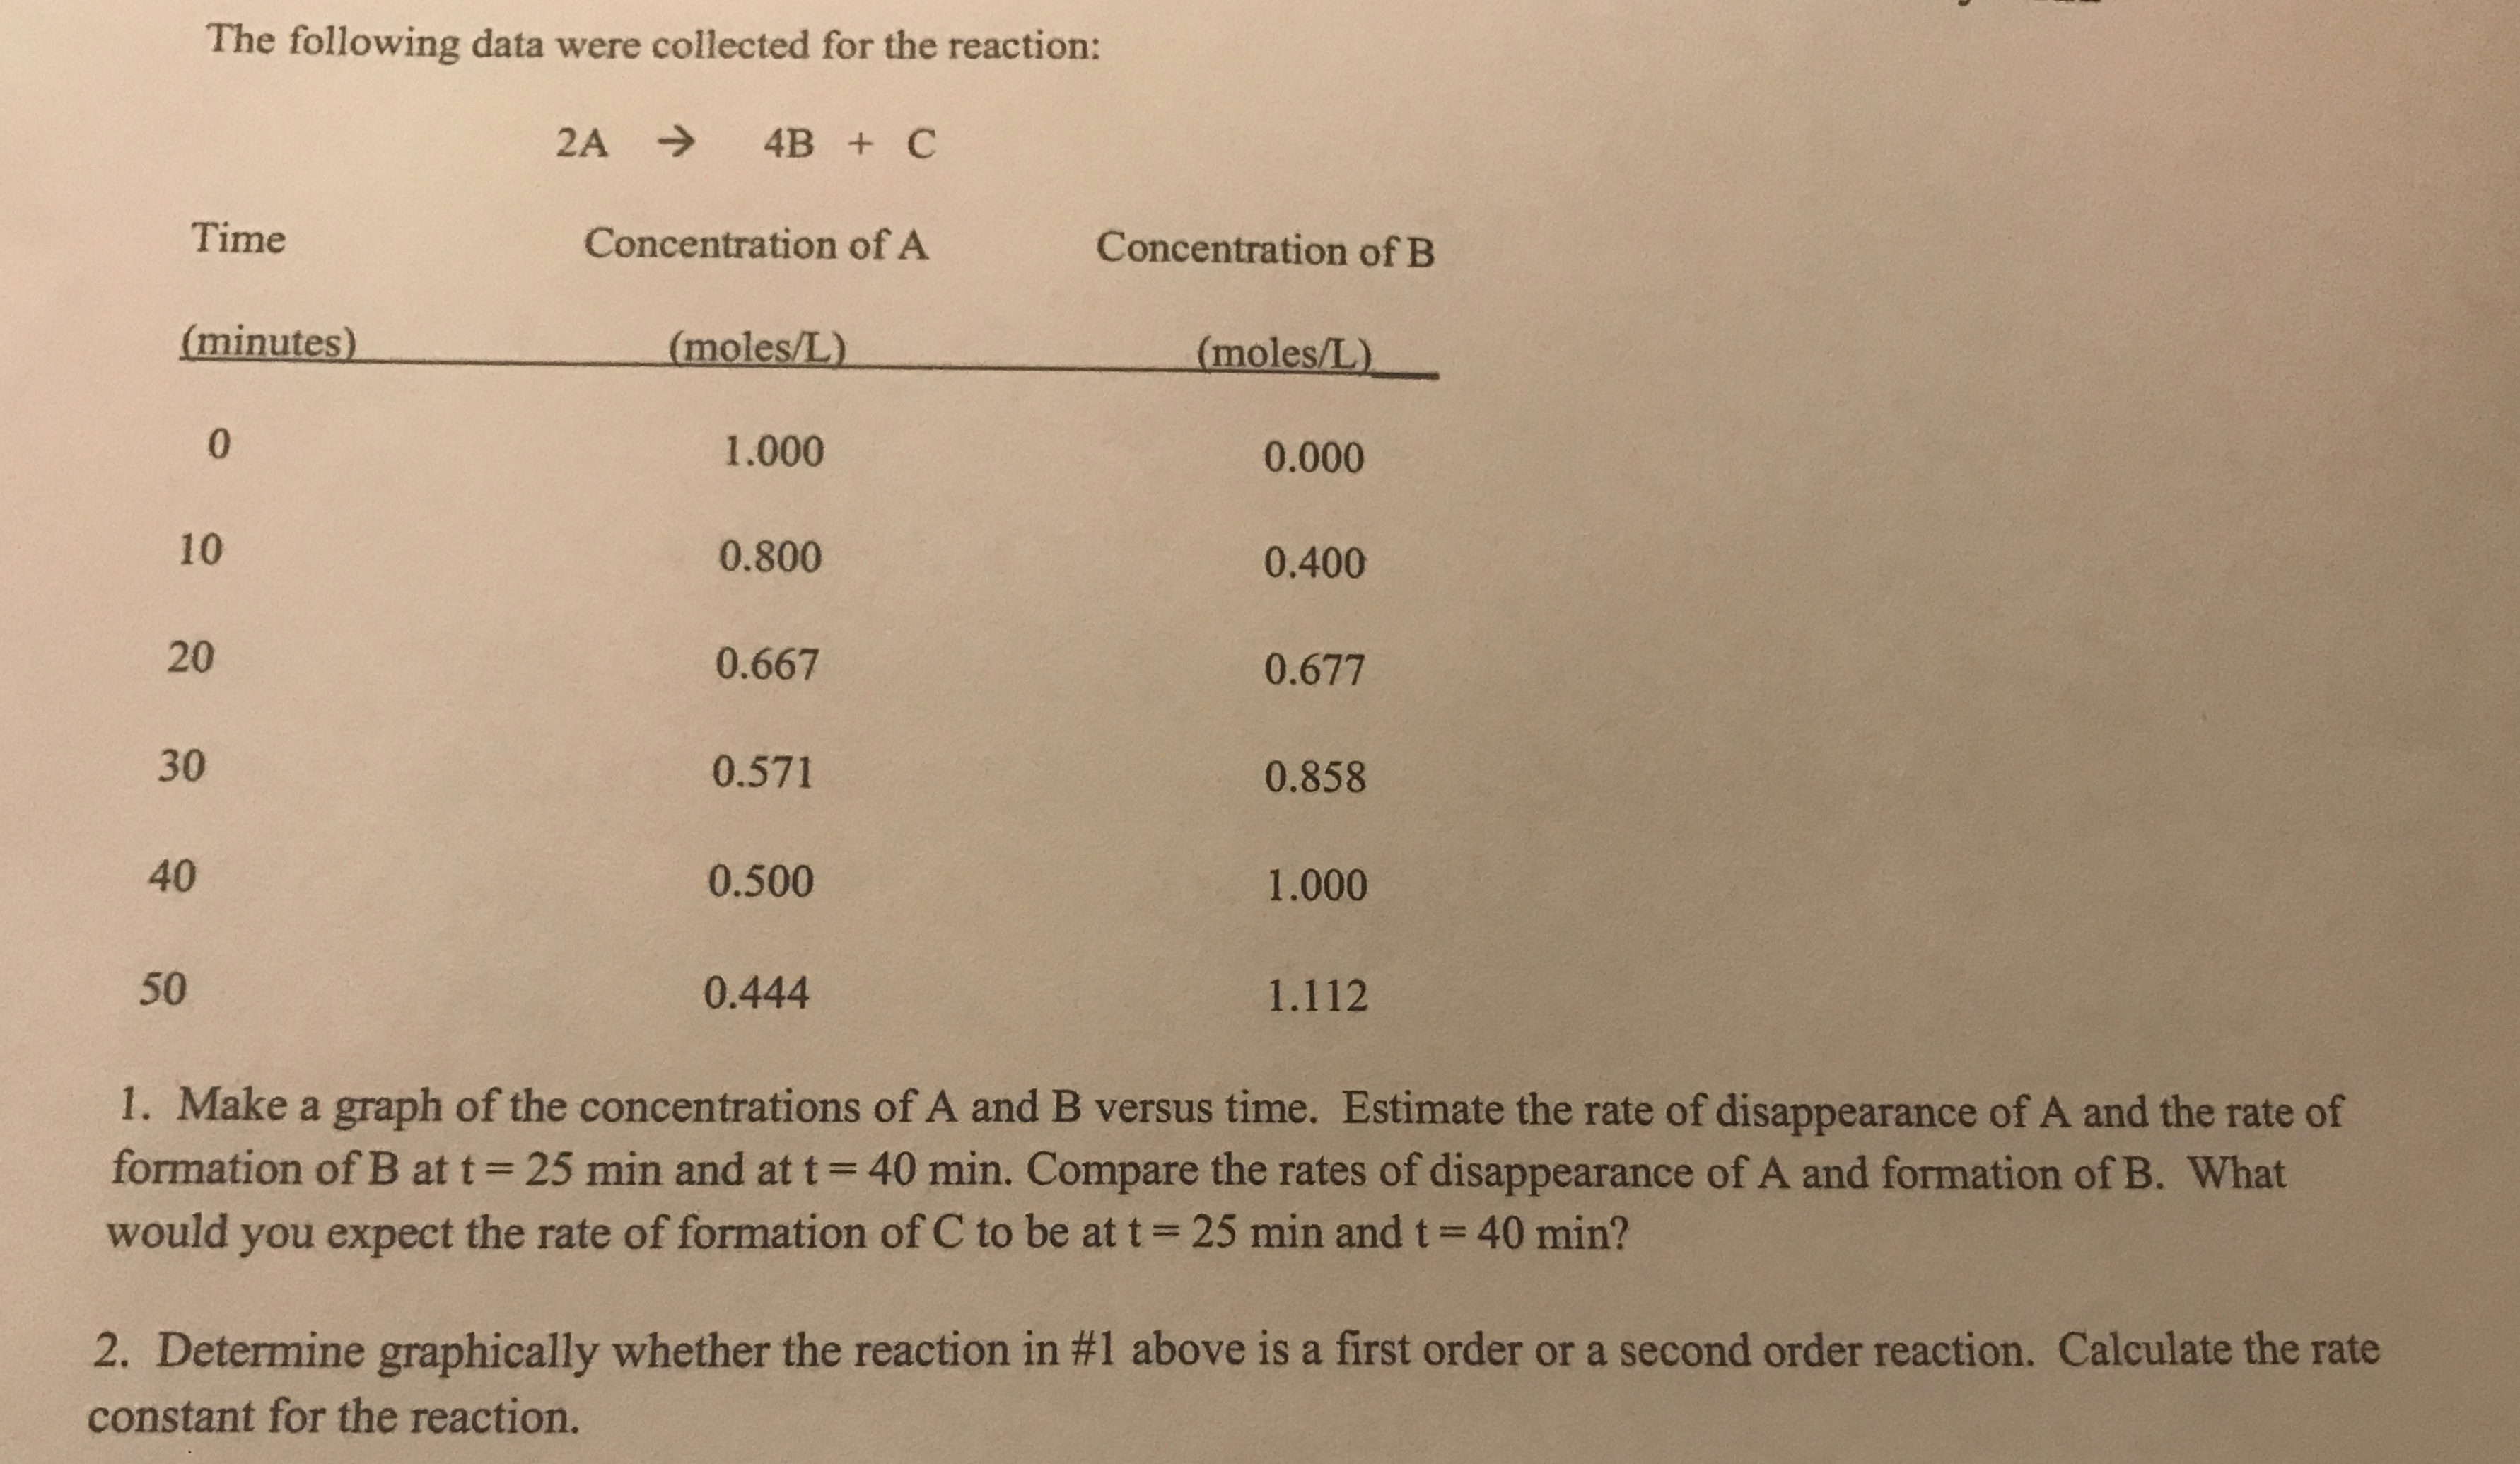 The following data were collected for the reaction:
2A ->
4B + C
Time
Concentration of A
Concentration of B
(minutes)
(moles/L)
(moles/L)
0.
1.000
0.000
10
0.800
0.400
20
0.667
0.677
30
0.571
0.858
40
0.500
1.000
50
0.444
1.112
1. Make a graph of the concentrations of A and B versus time. Estimate the rate of disappearance of A and the rate of
formation of B at t= 25 min and at t= 40 min. Compare the rates of disappearance ofA and formation of B. What
would you expect the rate of formation of C to be at t= 25 min and t =
40 min?
%3D
2. Determine graphically whether the reaction in #1 above is a first order or a second order reaction. Calculate the rate
constant for the reaction.
